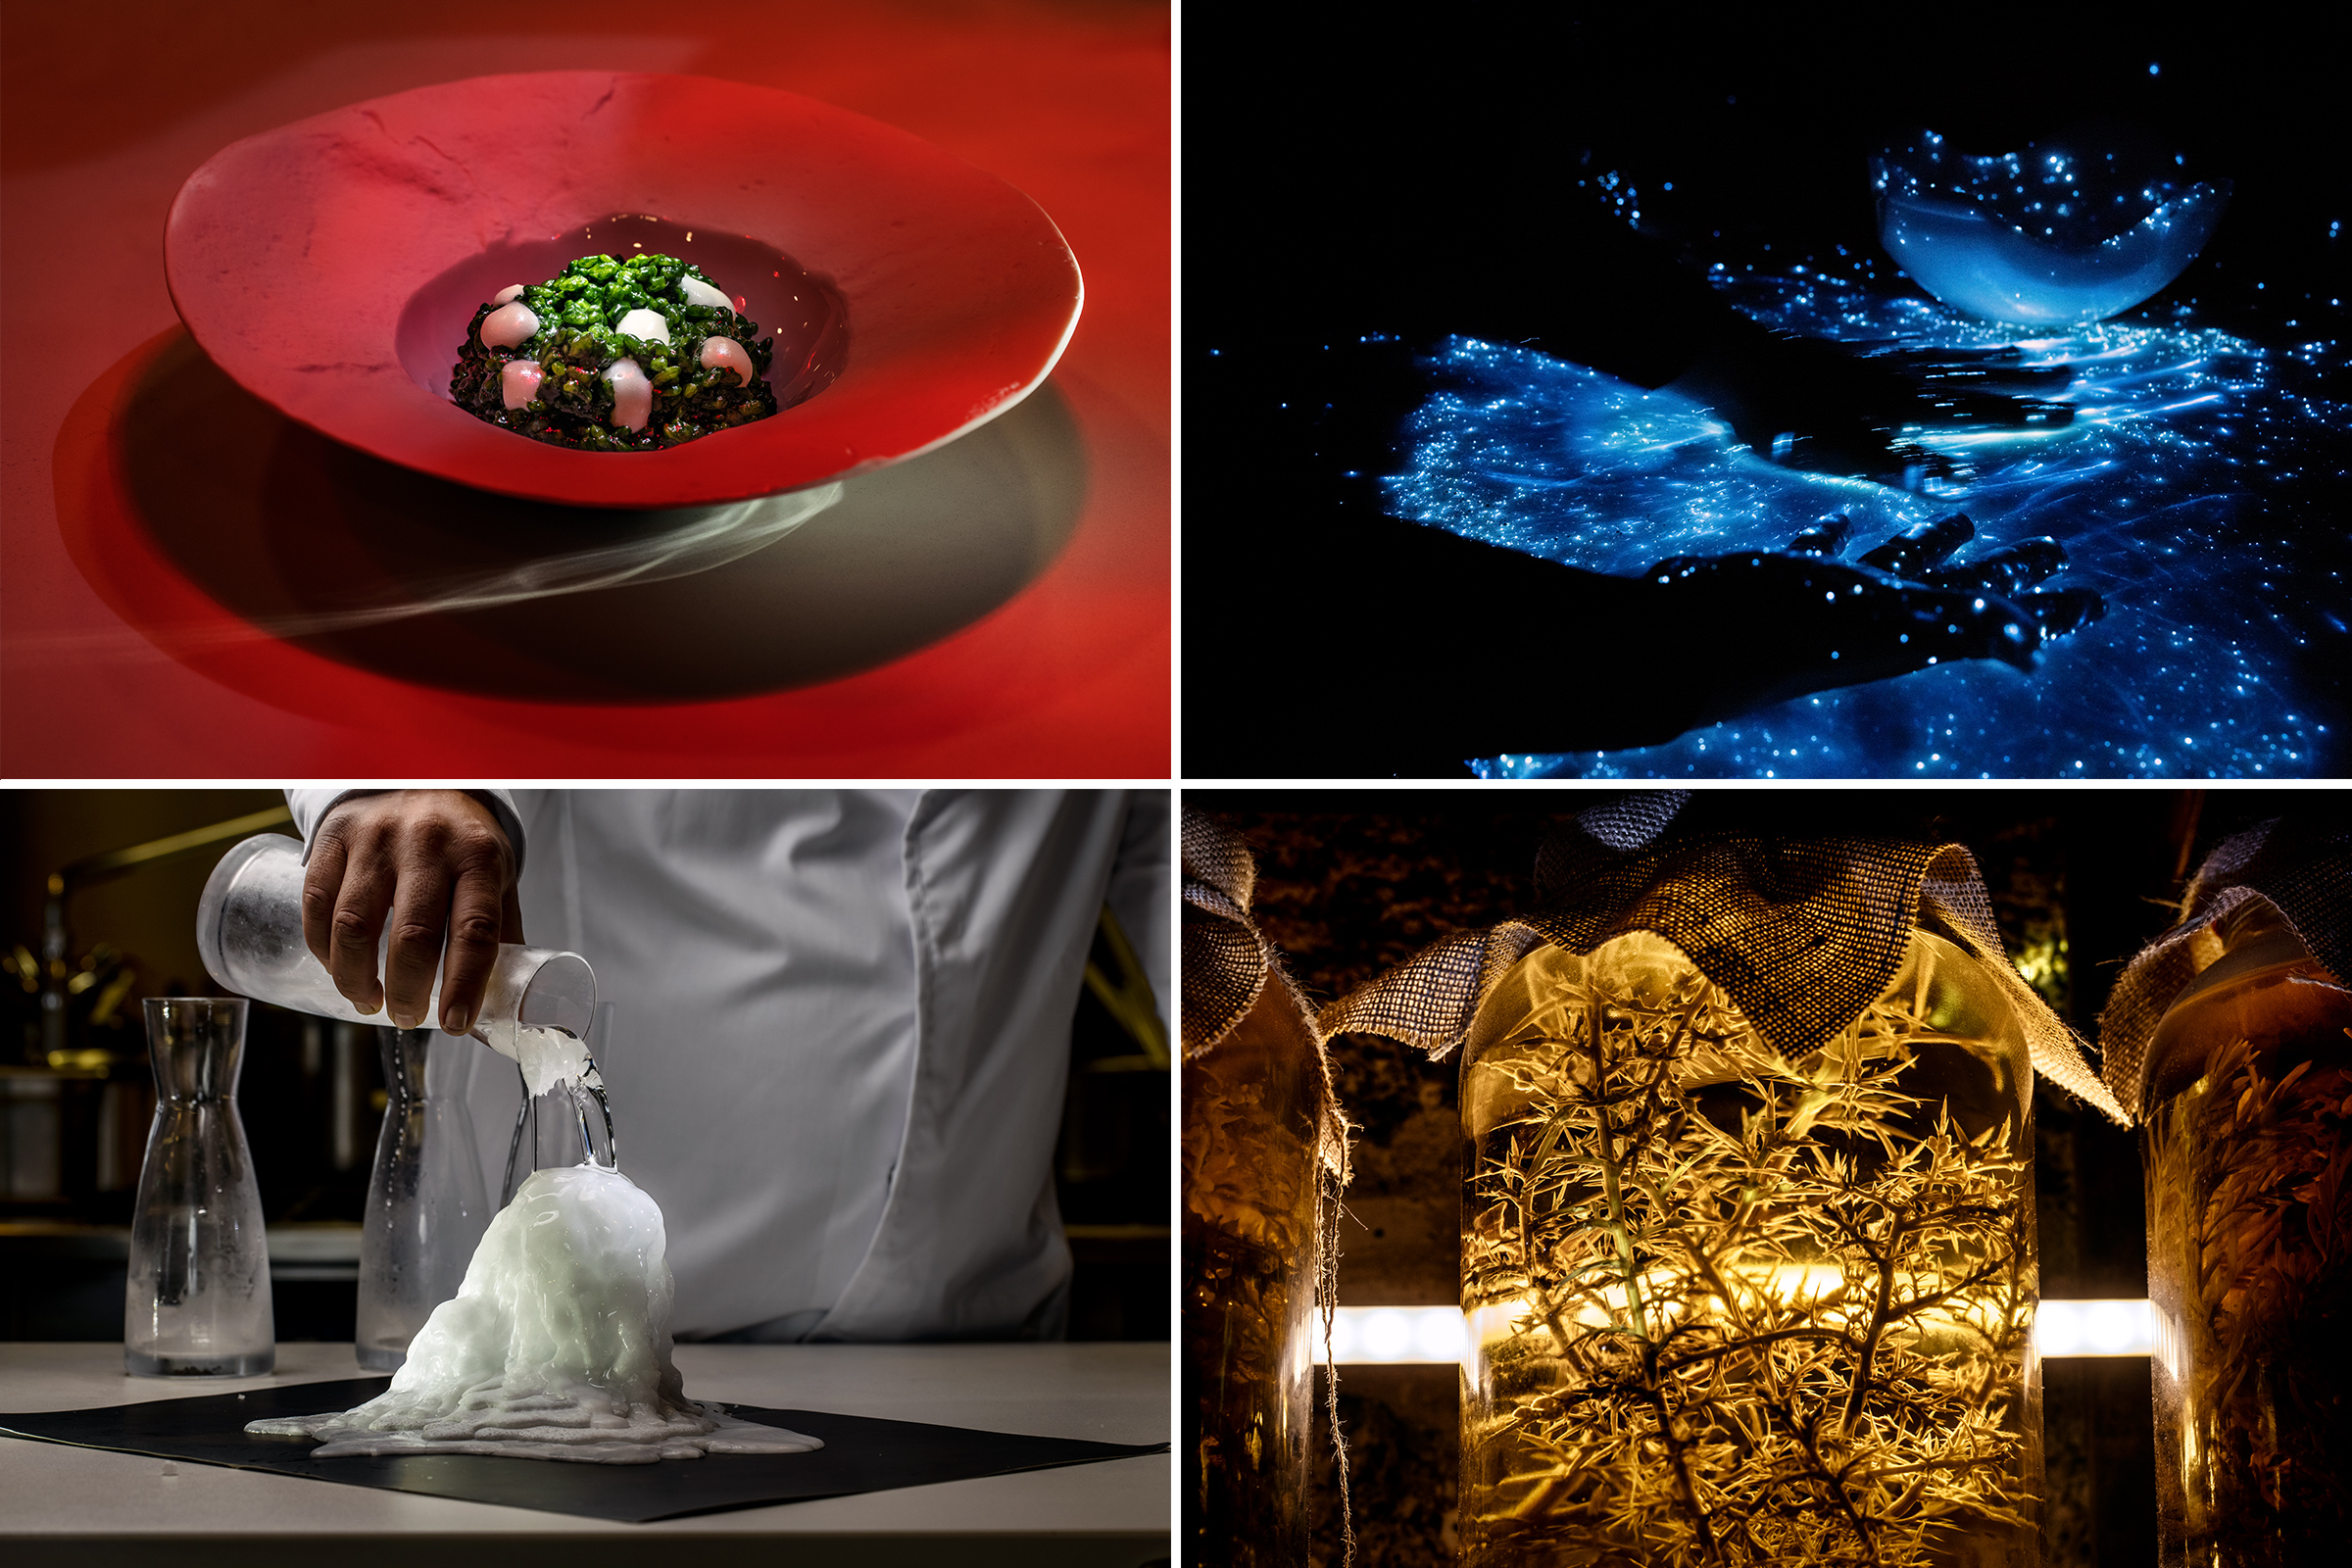 From top left, clockwise: A plankton rice dish at Aponiente; León performs Luz del Mar, mixing two proteins to get fluorescence; a halophyte plant at the restaurant lab; León performs the Sal viva technique (Paolo Verzone—VU for TIME)